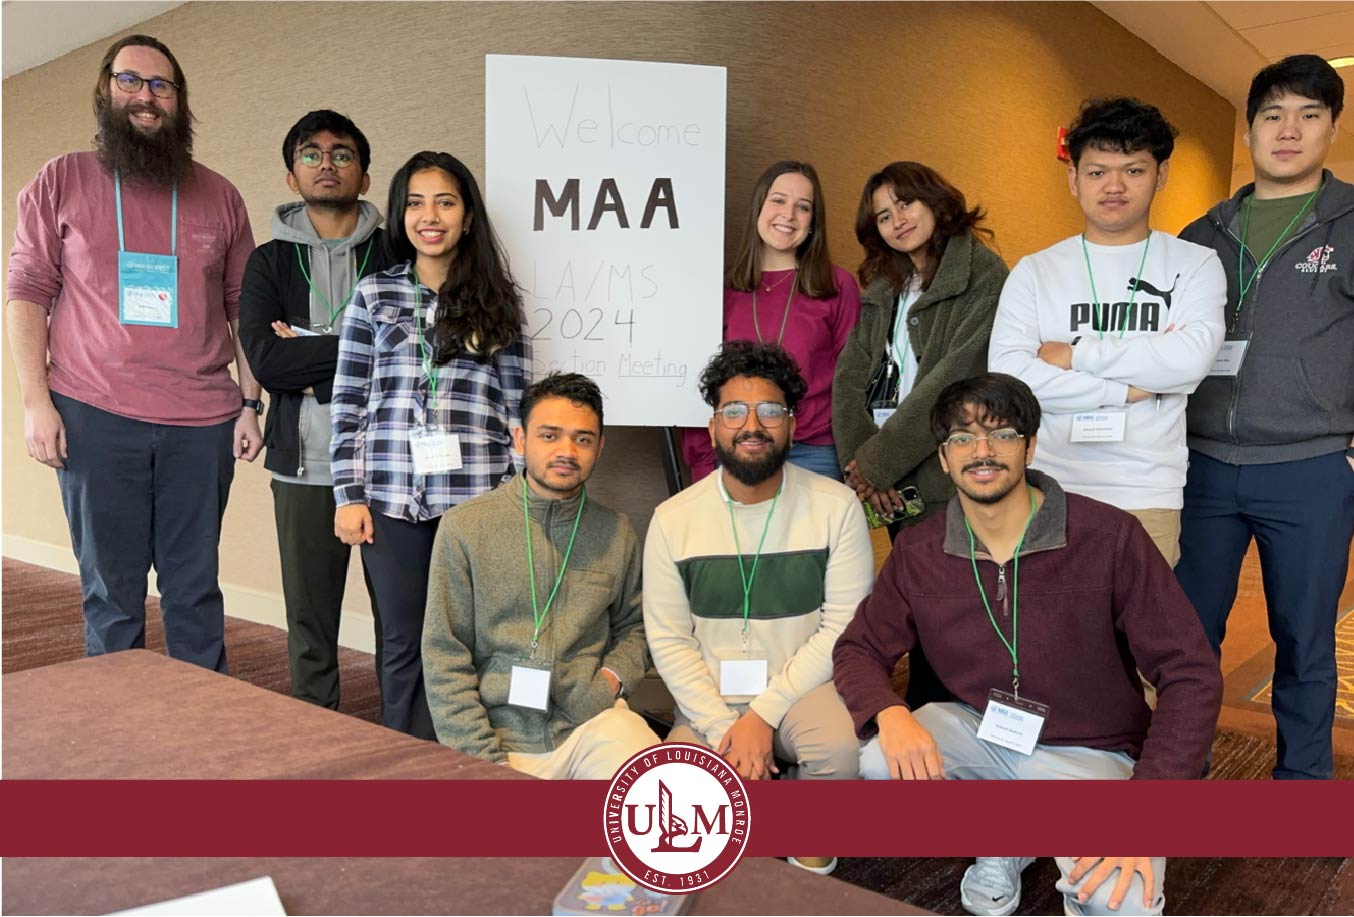 Ƶ Math students attend annual meeting and competition